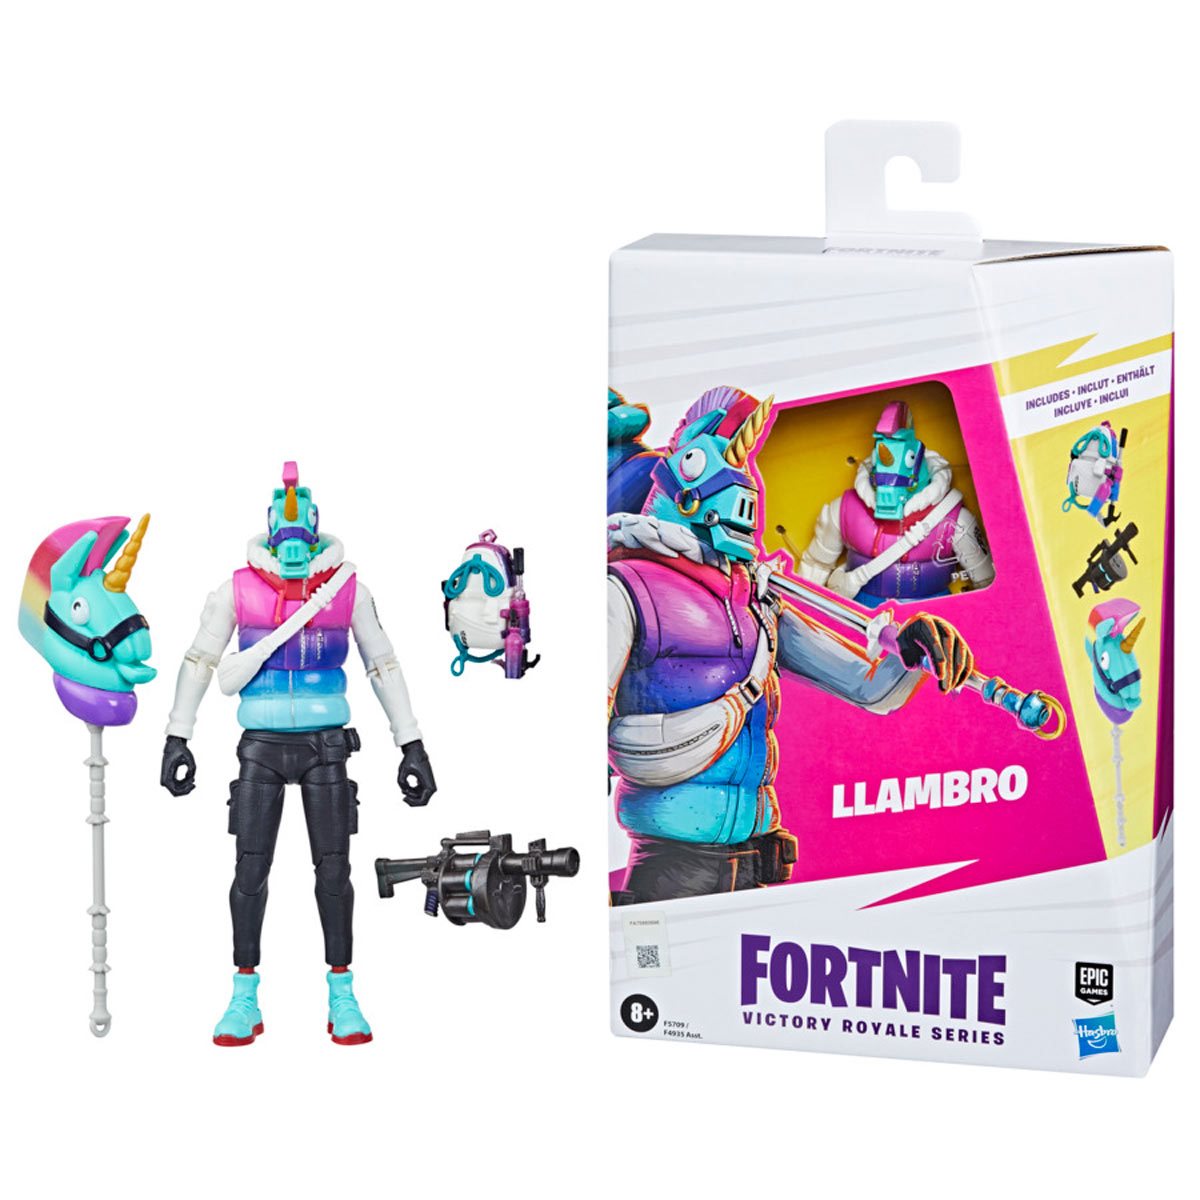 Fortnite Victory Royale Series - Llamabro 6-Inch Action Figure